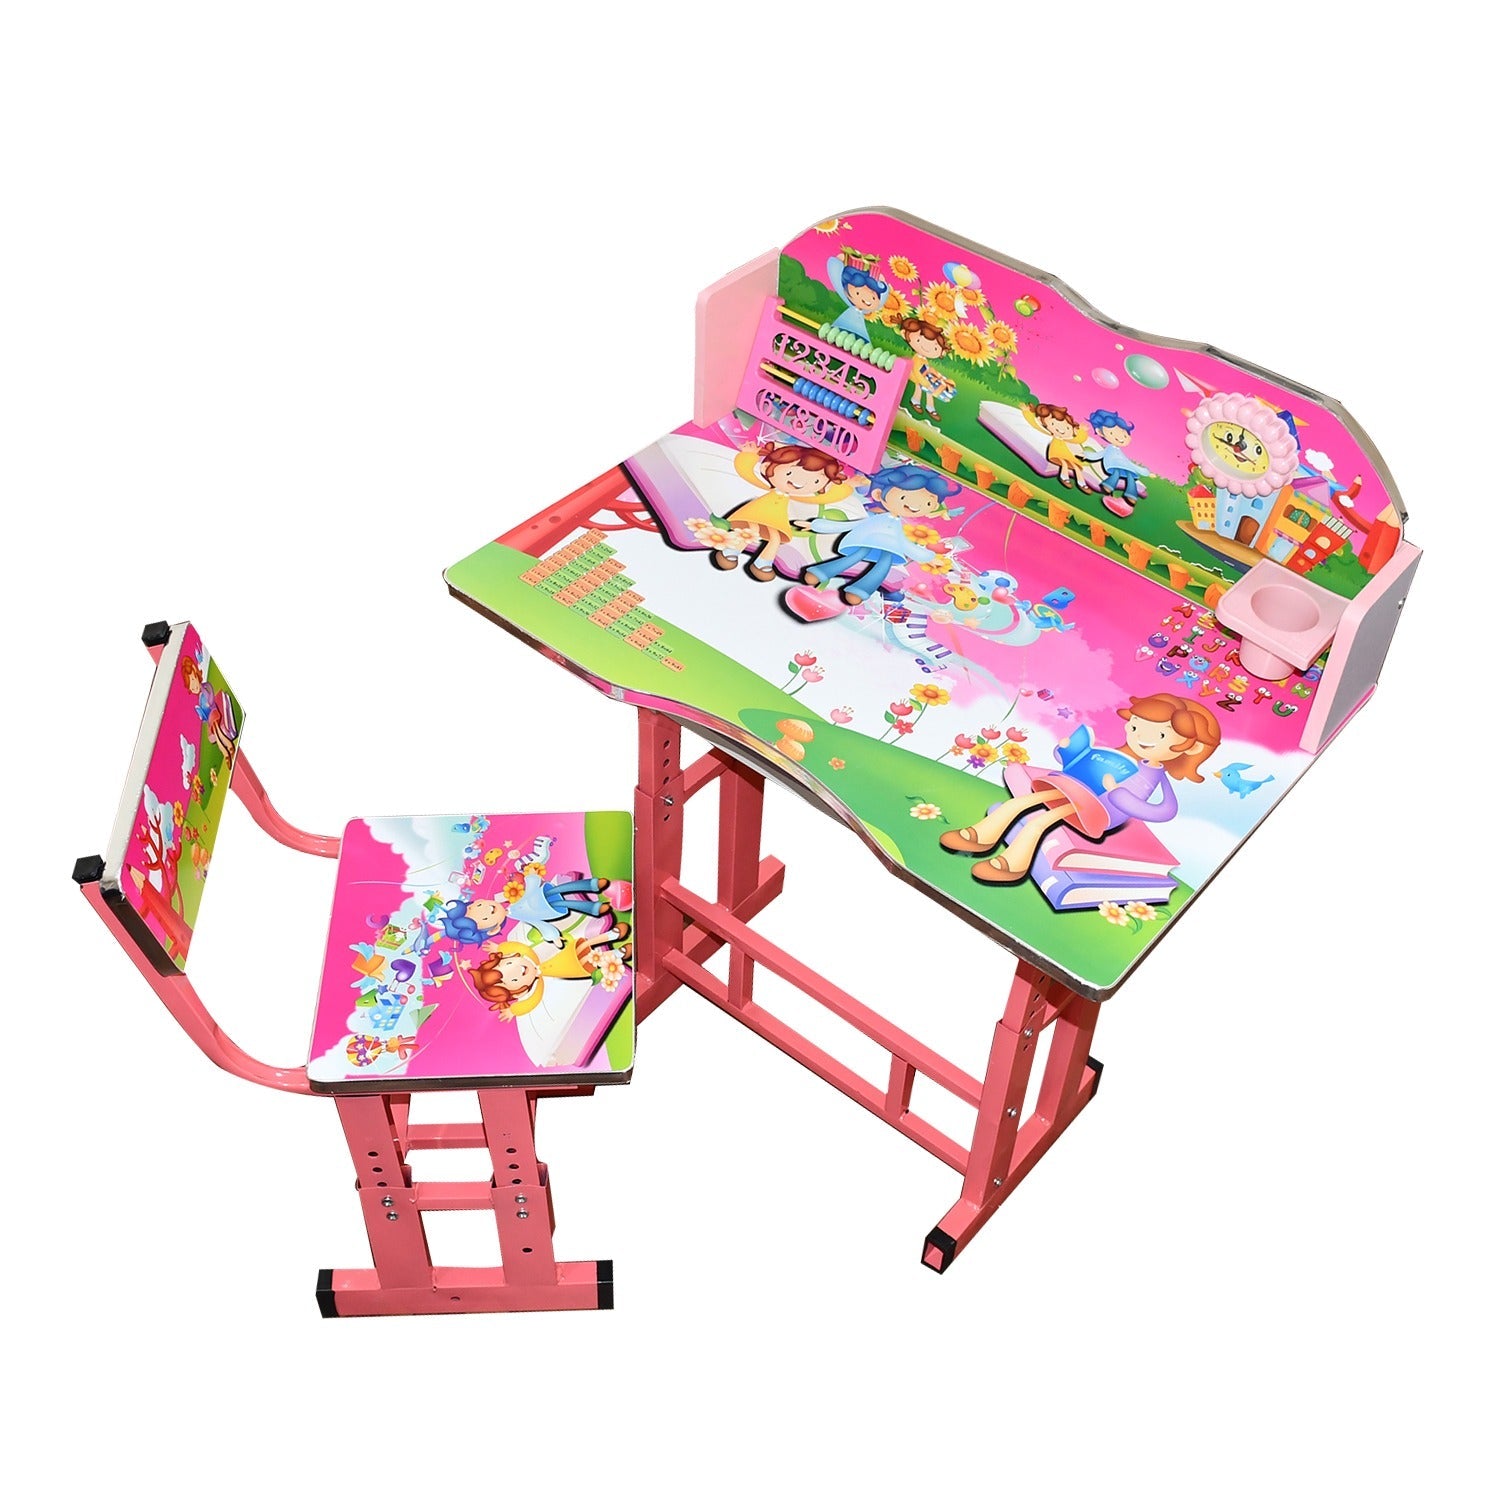 7901 Multifunction Portable Study Table for Kids Table Chair Set for Kids Study Table with Chair for Work office, home